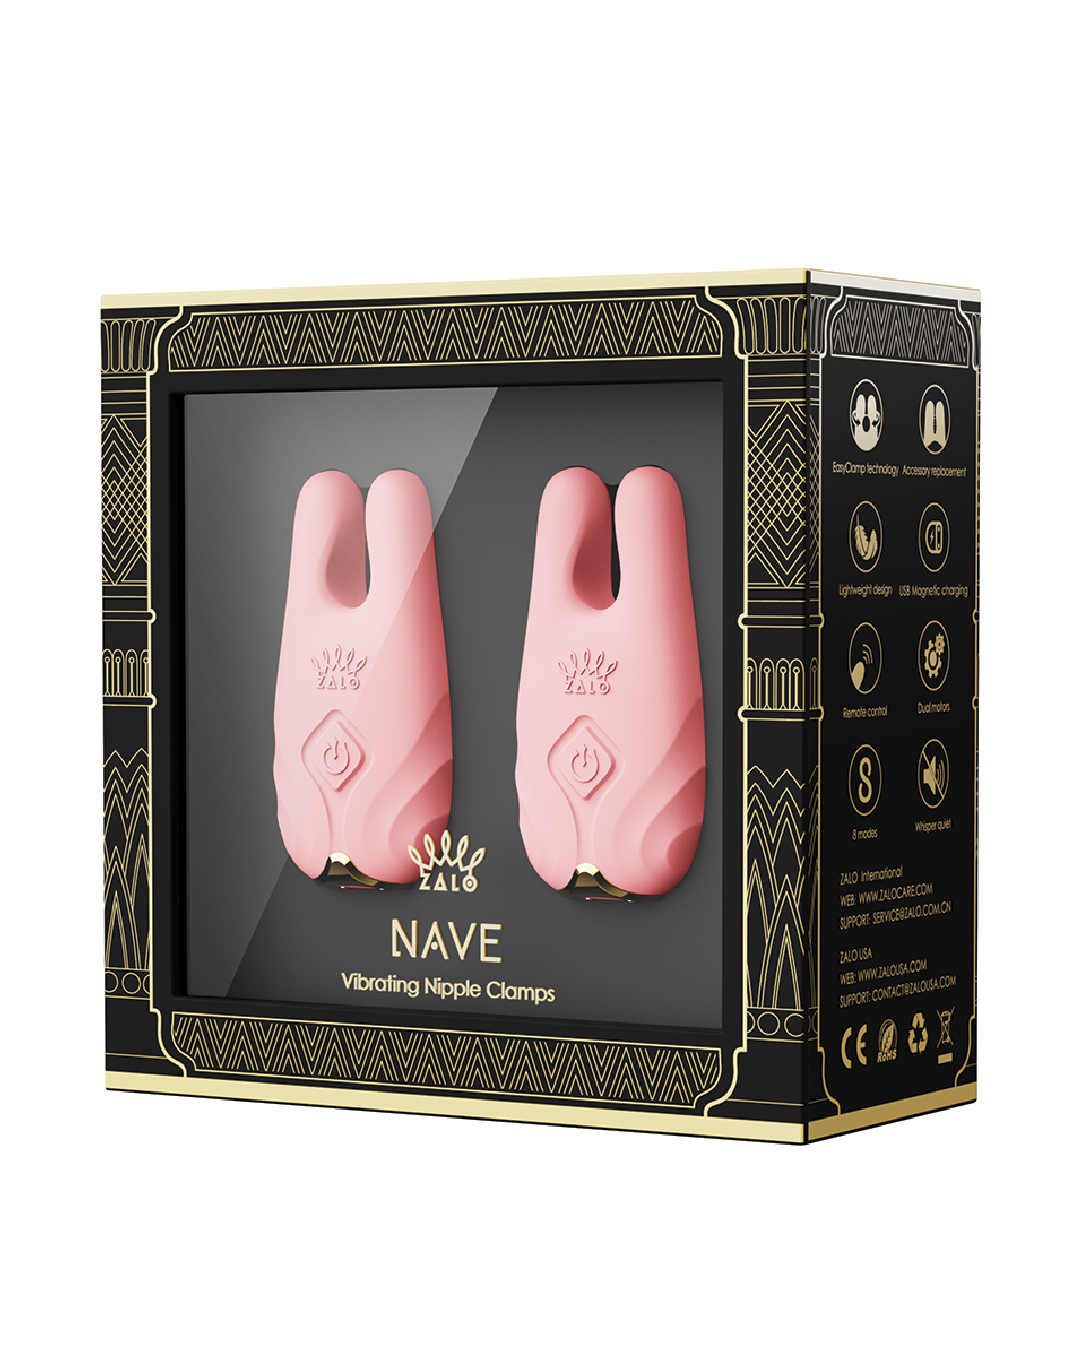 Zalo Nave Vibrating Nipple Clamps App Enabled and Bluetooth in pInk  box 